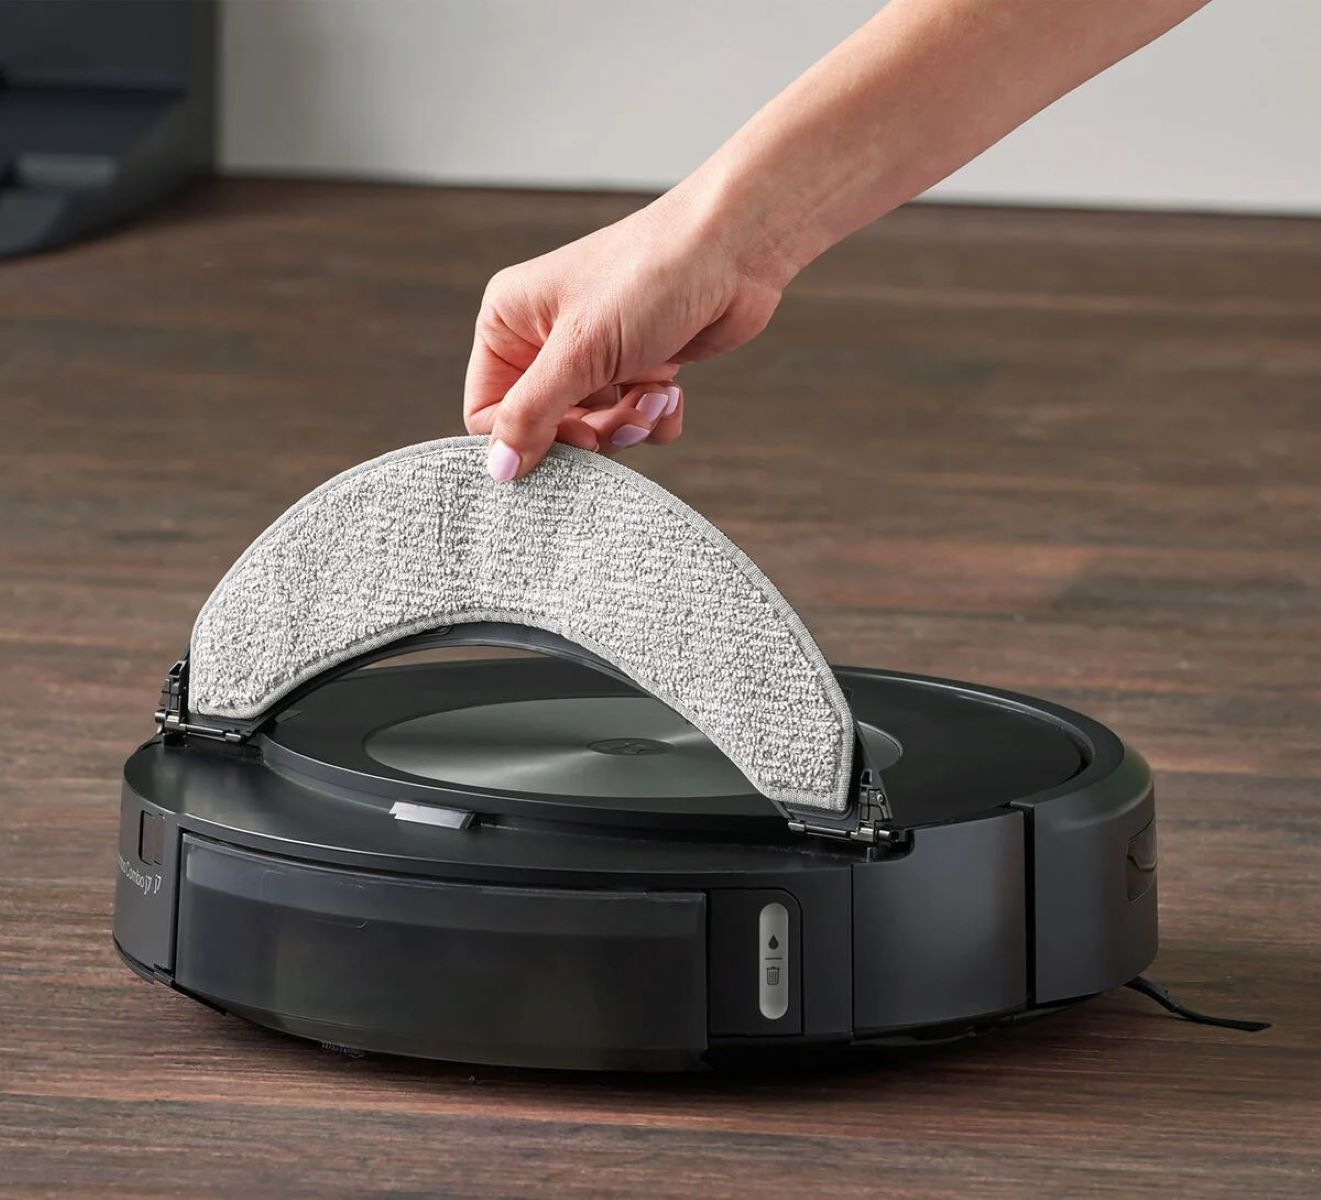 How Does The Roomba Mop Work